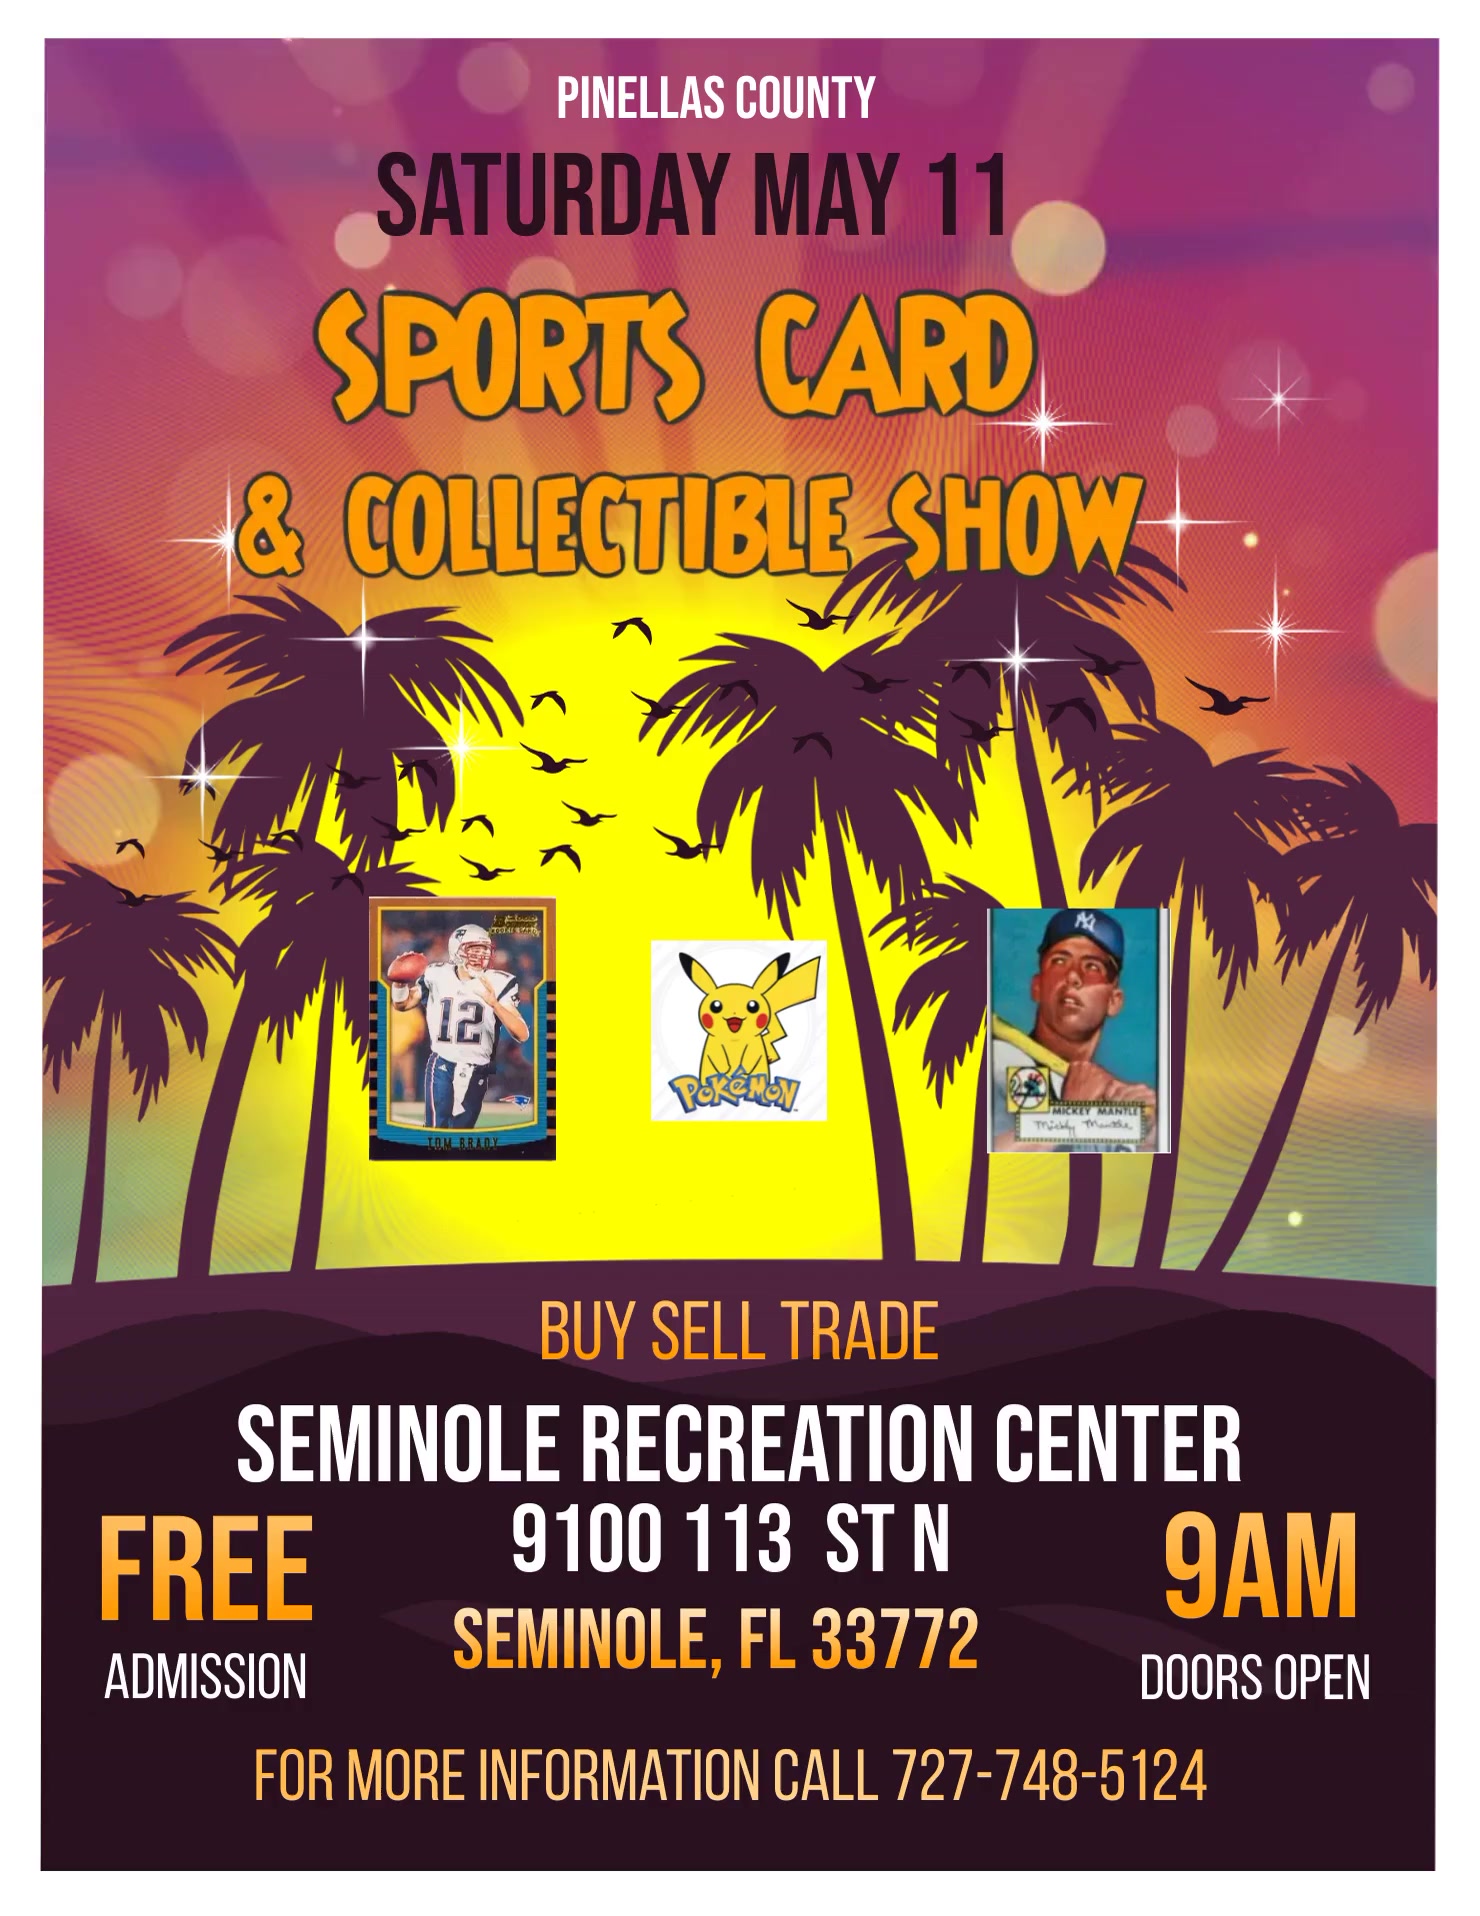 Pinellas County Sports Card & Collectible Show - Seminole